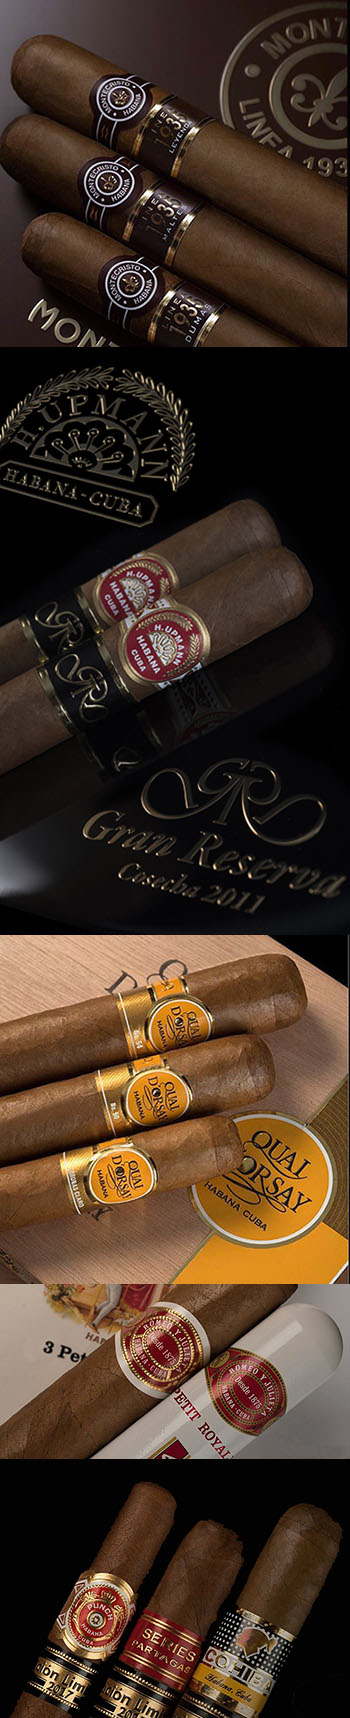 The XIX Habano Festival had finished with the Montecristo brand as the main protagonist.